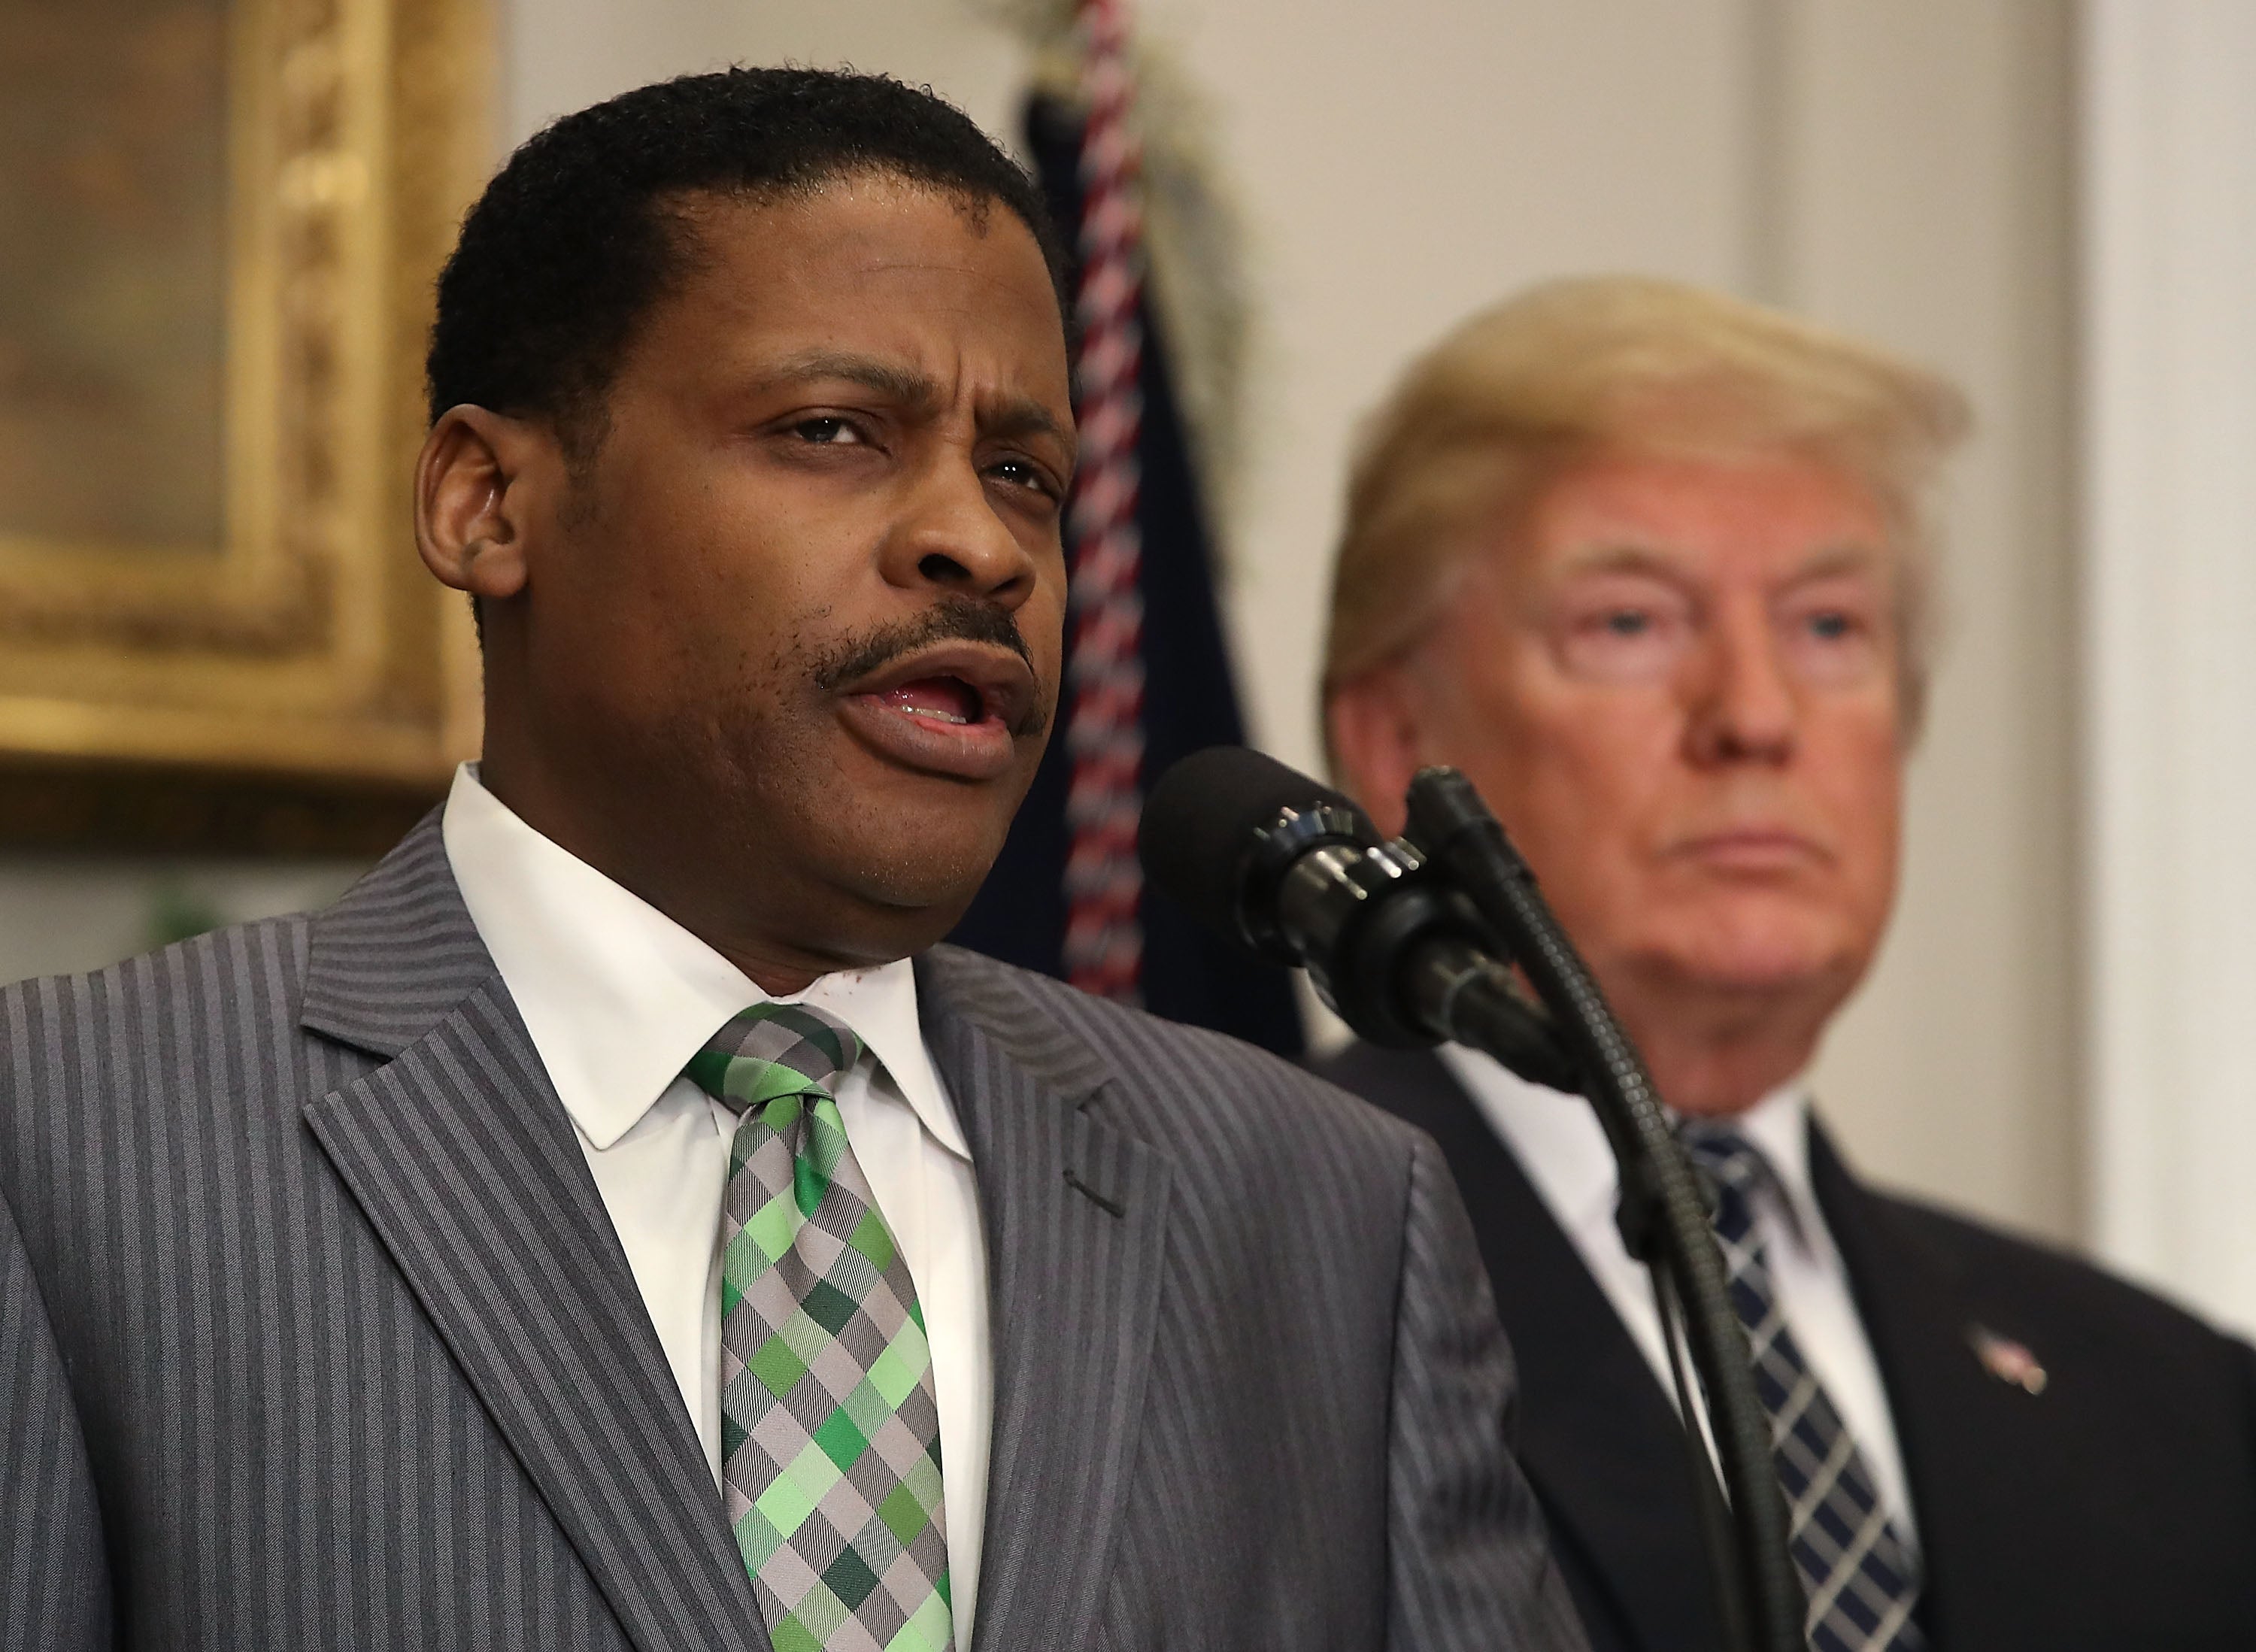 Martin Luther King Jr.’s Nephew Thinks Donald Trump Is Not Racist, Just 'Racially Ignorant'
